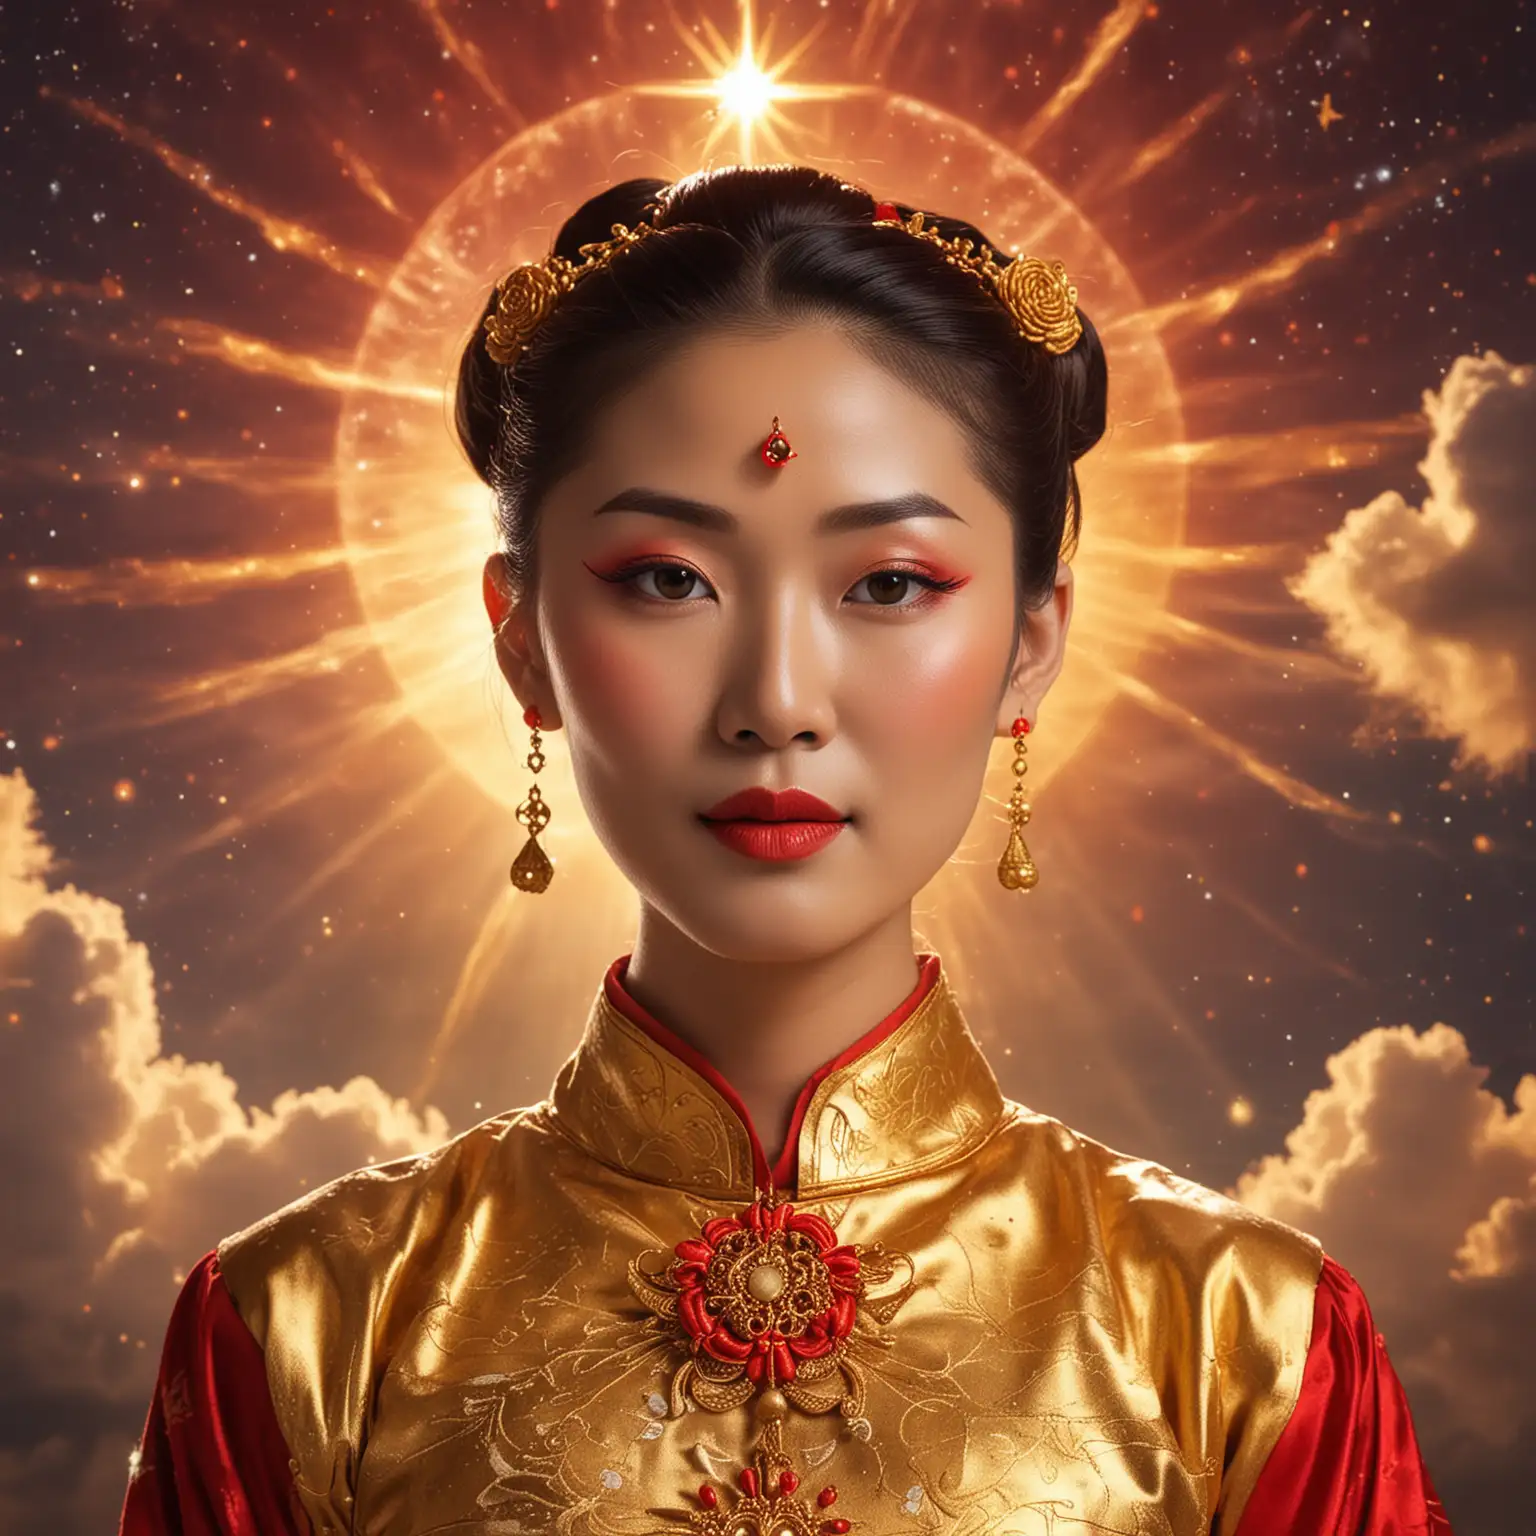 Angelic Asian mother dressed in traditional make up and clothing of shining red and gold with hair in a bun. She is standing in front of celestial skies.